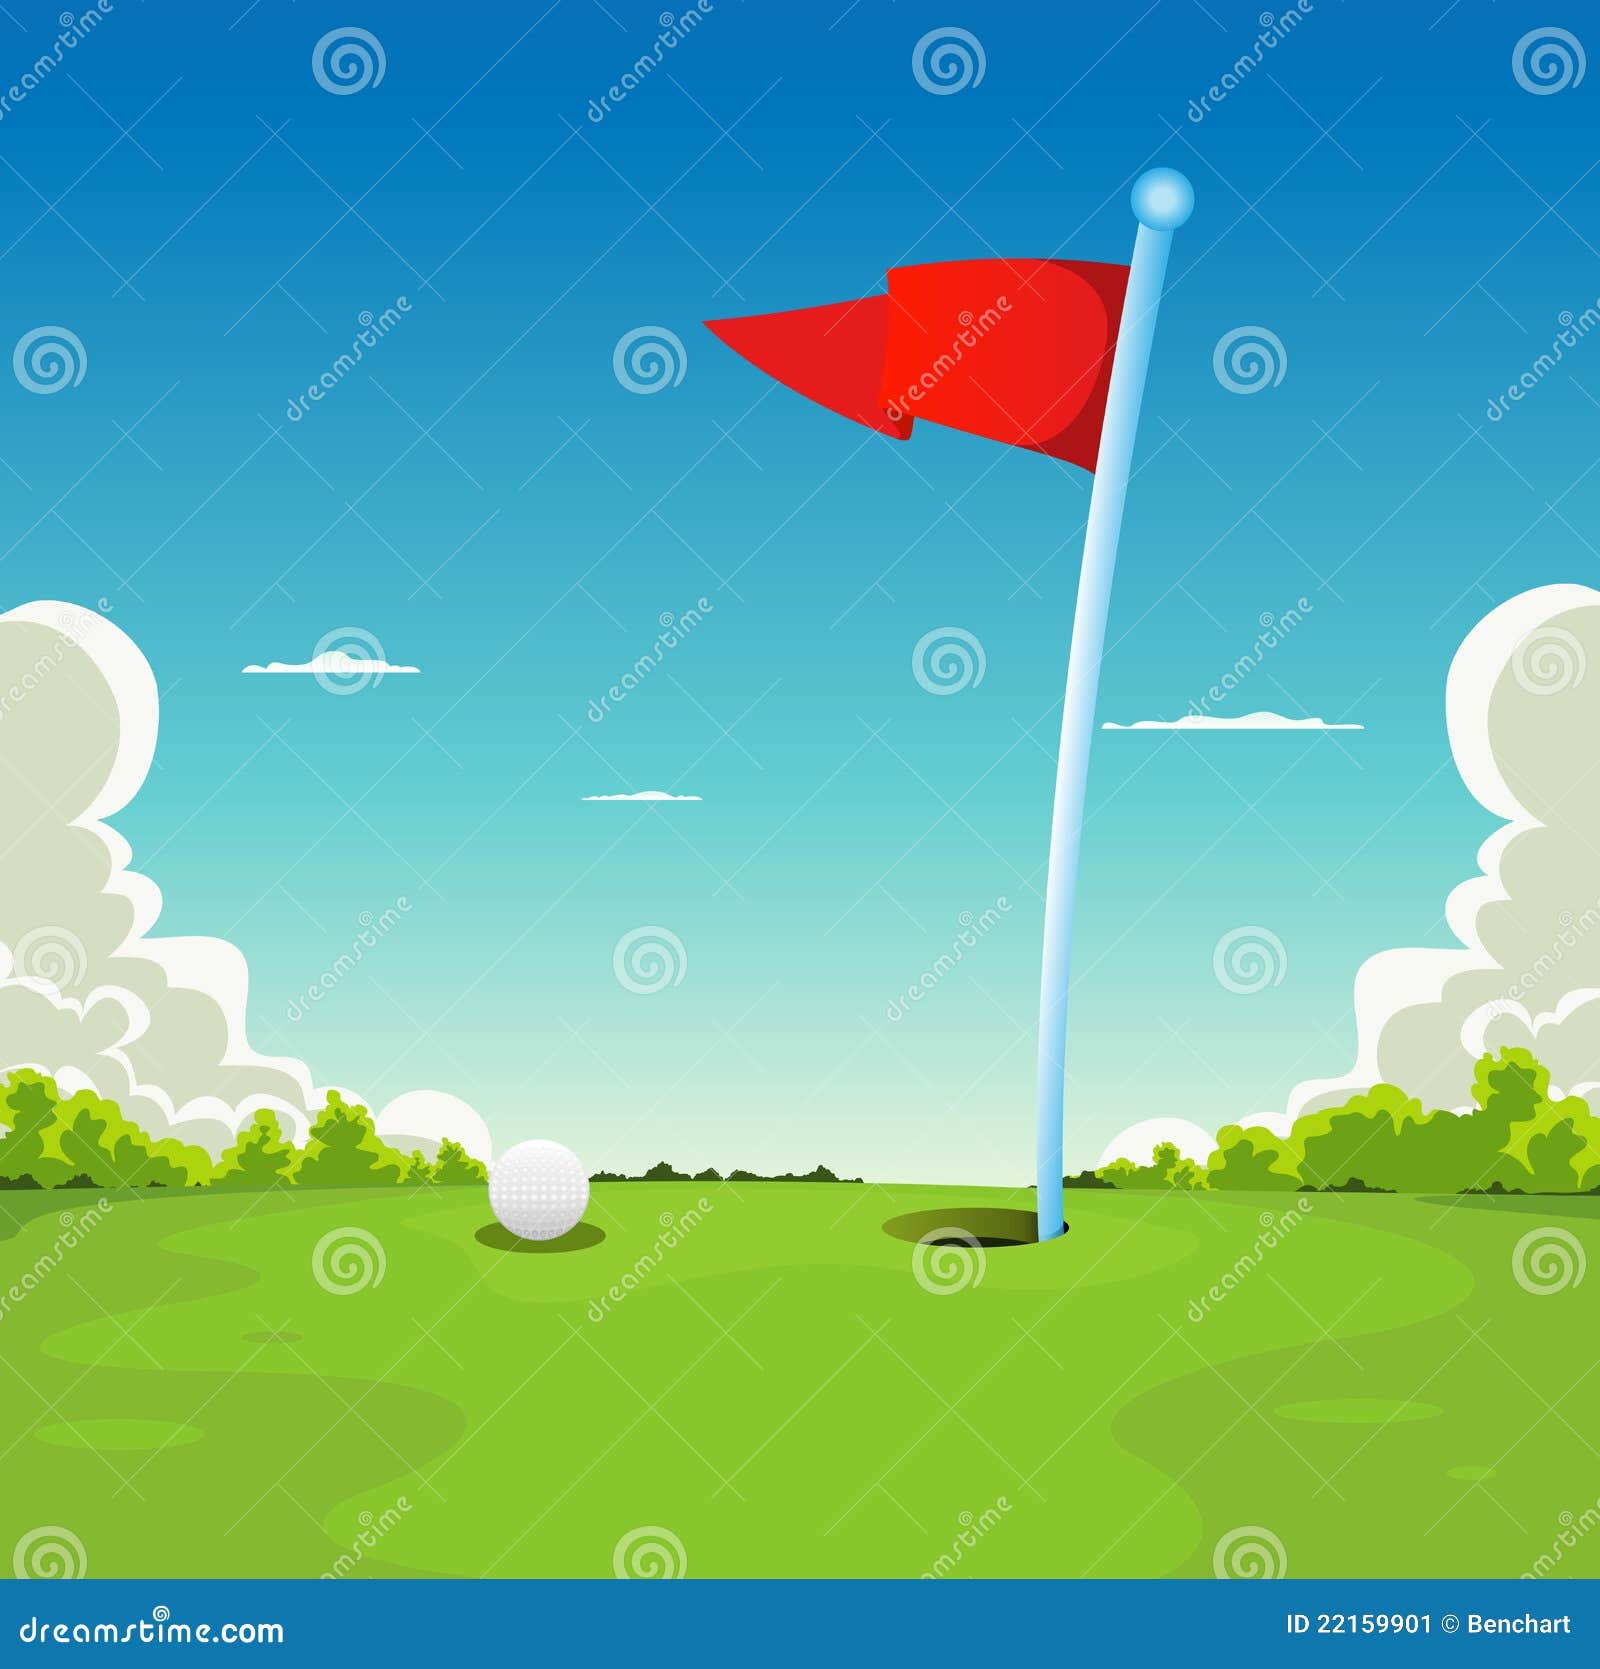 putting green - golf ball and flag